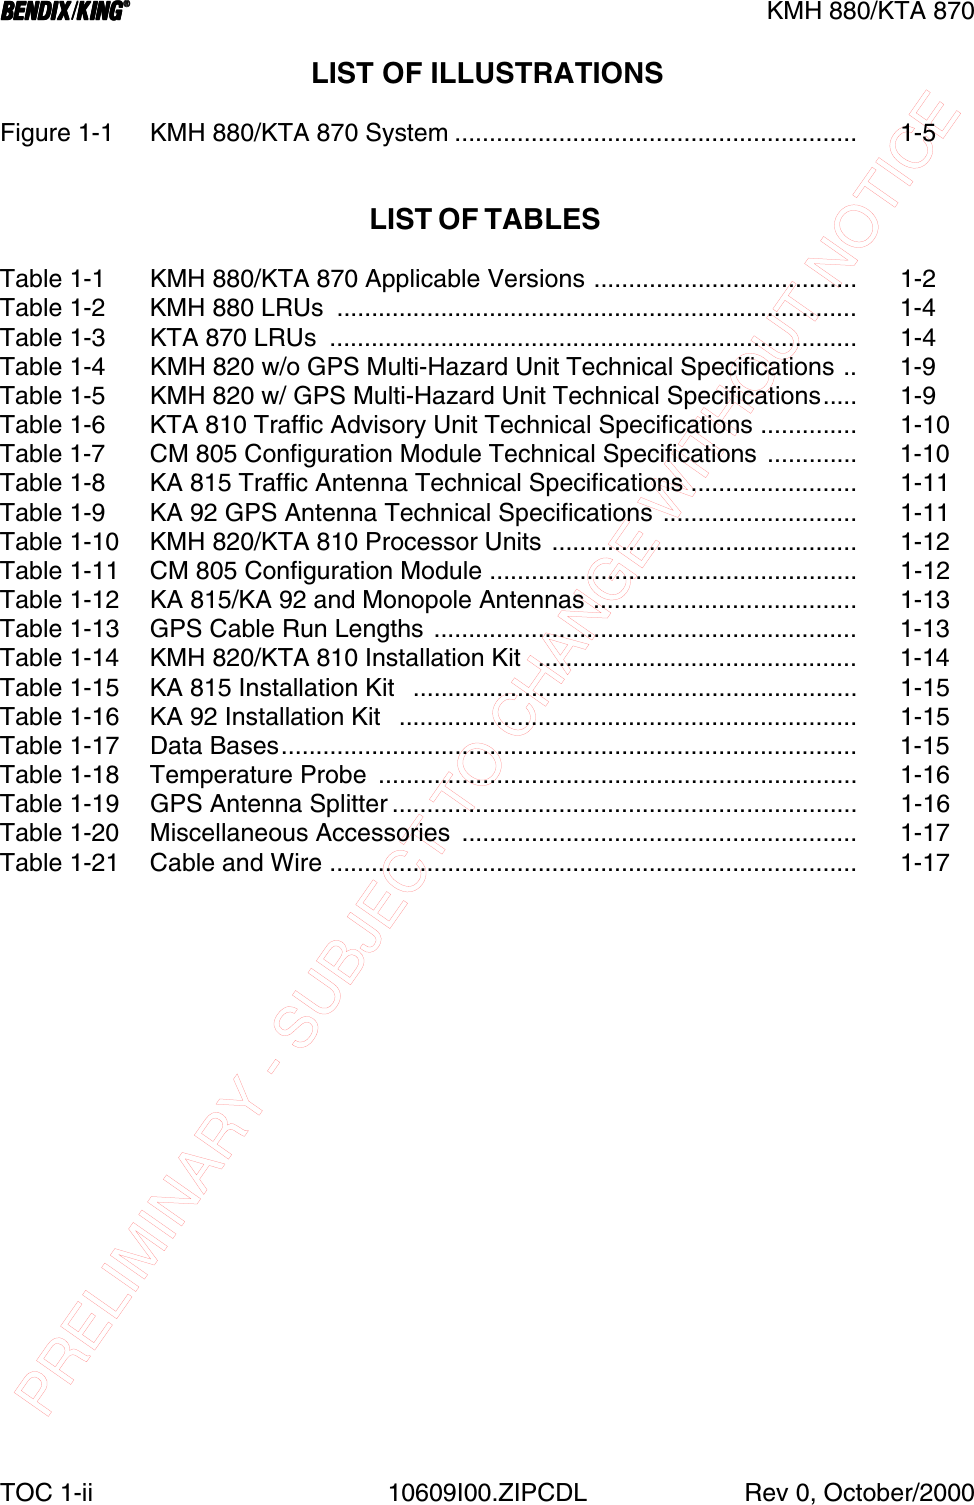 PRELIMINARY - SUBJECT TO CHANGE WITHOUT NOTICEBBBBKMH 880/KTA 870TOC 1-ii 10609I00.ZIPCDL Rev 0, October/2000LIST OF ILLUSTRATIONSFigure 1-1 KMH 880/KTA 870 System .......................................................... 1-5LIST OF TABLES Table 1-1 KMH 880/KTA 870 Applicable Versions ...................................... 1-2Table 1-2  KMH 880 LRUs  ........................................................................... 1-4Table 1-3  KTA 870 LRUs  ............................................................................ 1-4Table 1-4  KMH 820 w/o GPS Multi-Hazard Unit Technical Specifications .. 1-9Table 1-5 KMH 820 w/ GPS Multi-Hazard Unit Technical Specifications..... 1-9Table 1-6  KTA 810 Traffic Advisory Unit Technical Specifications .............. 1-10Table 1-7  CM 805 Configuration Module Technical Specifications ............. 1-10Table 1-8  KA 815 Traffic Antenna Technical Specifications ........................ 1-11Table 1-9  KA 92 GPS Antenna Technical Specifications  ............................ 1-11Table 1-10 KMH 820/KTA 810 Processor Units ............................................ 1-12Table 1-11  CM 805 Configuration Module ..................................................... 1-12Table 1-12  KA 815/KA 92 and Monopole Antennas ...................................... 1-13Table 1-13  GPS Cable Run Lengths ............................................................. 1-13Table 1-14  KMH 820/KTA 810 Installation Kit  .............................................. 1-14Table 1-15  KA 815 Installation Kit   ................................................................ 1-15Table 1-16  KA 92 Installation Kit   .................................................................. 1-15Table 1-17 Data Bases................................................................................... 1-15Table 1-18  Temperature Probe  ..................................................................... 1-16Table 1-19 GPS Antenna Splitter ................................................................... 1-16Table 1-20  Miscellaneous Accessories  ......................................................... 1-17Table 1-21  Cable and Wire ............................................................................ 1-17